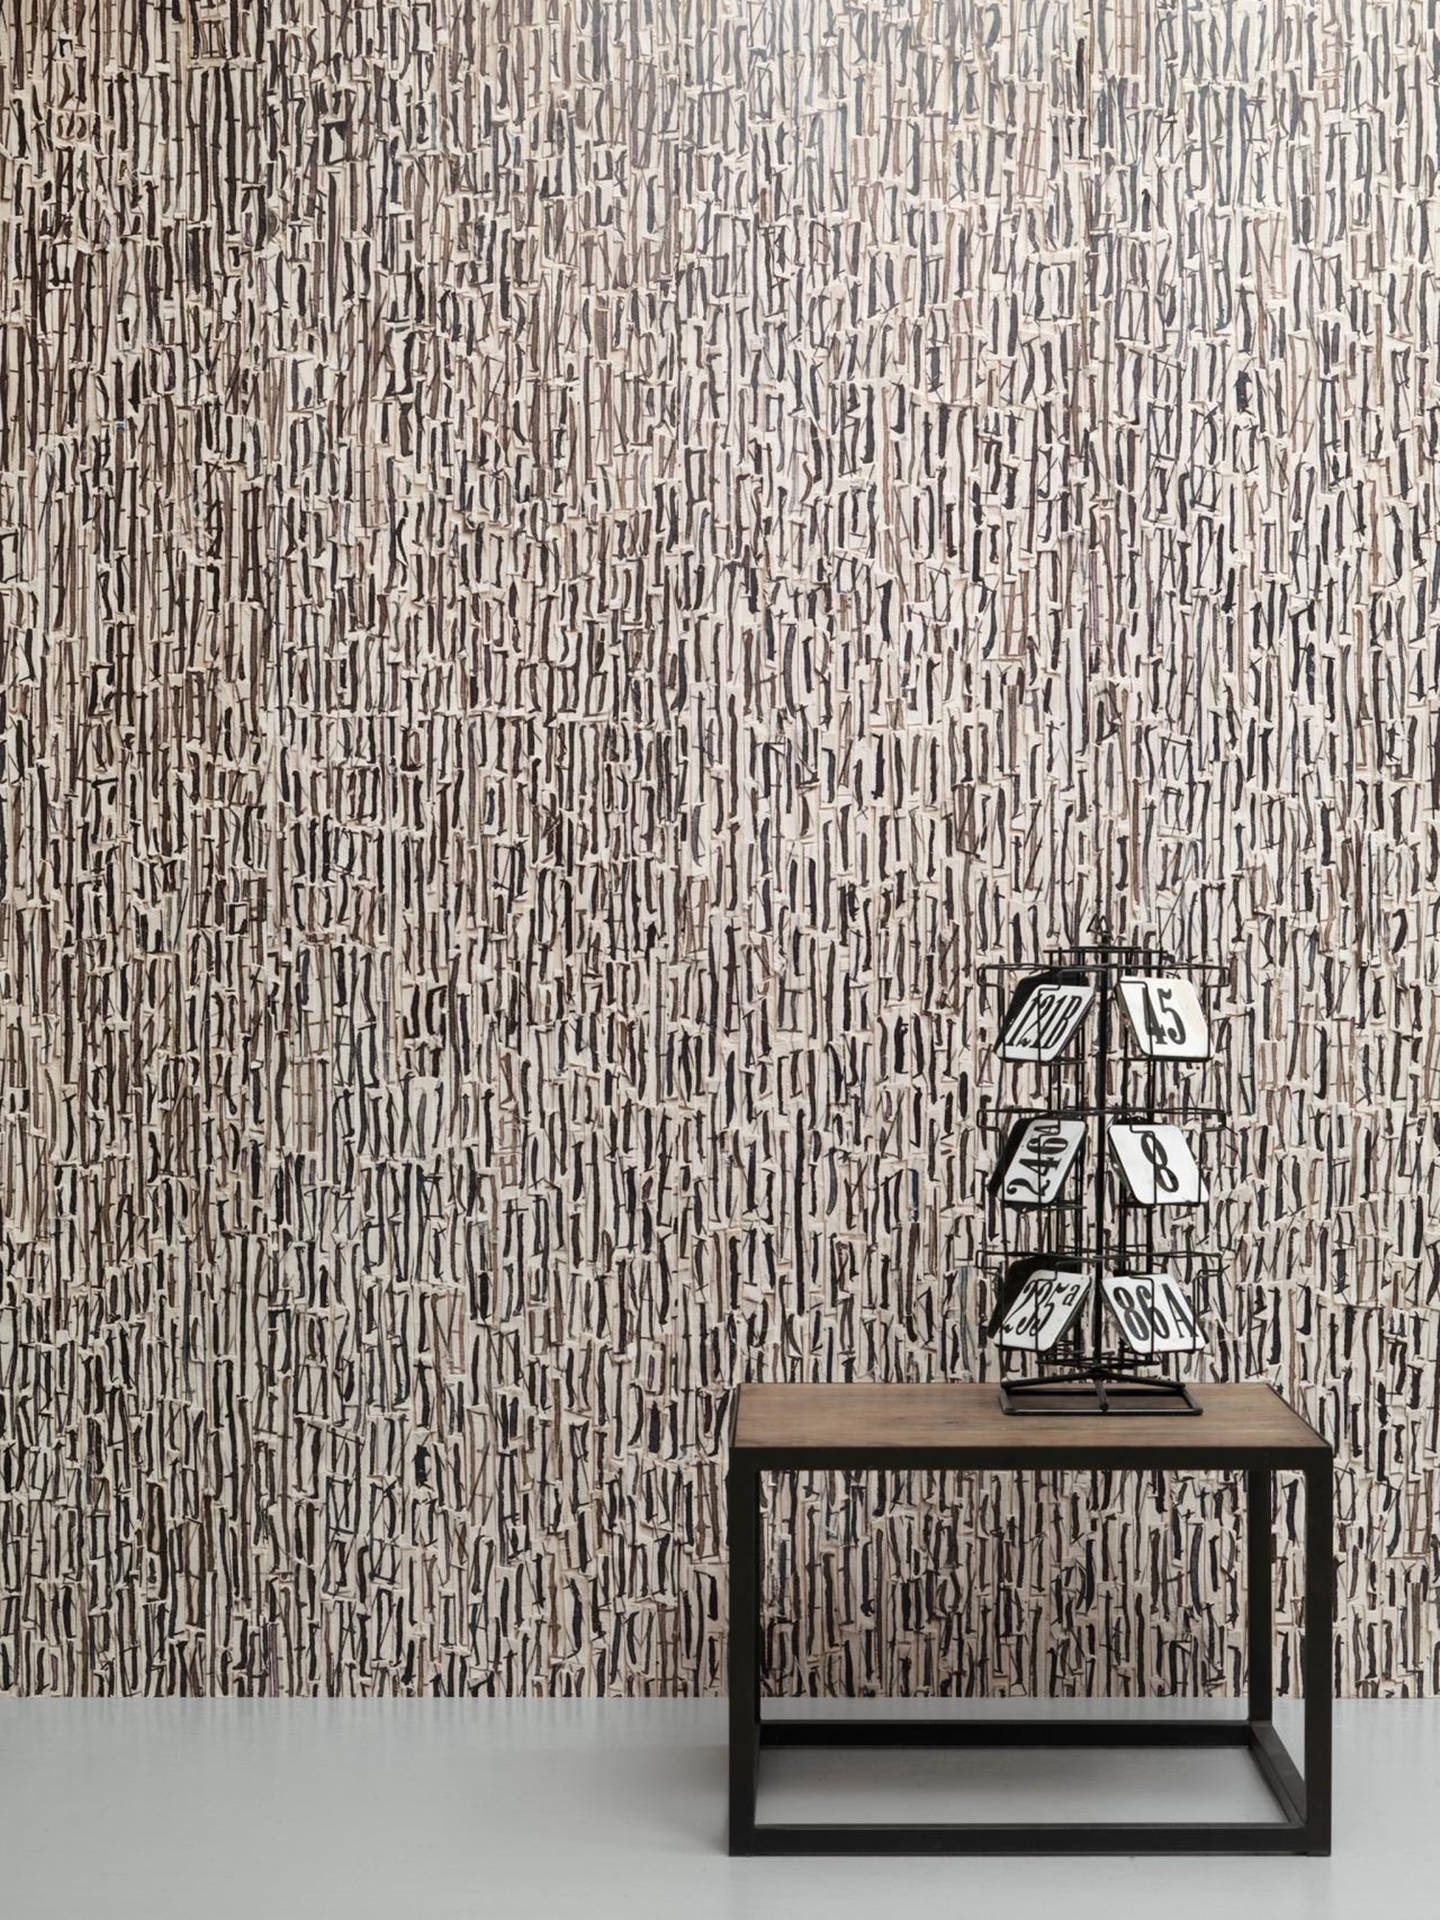 Contemporary Modern Grey Birch Tree Wall Picture